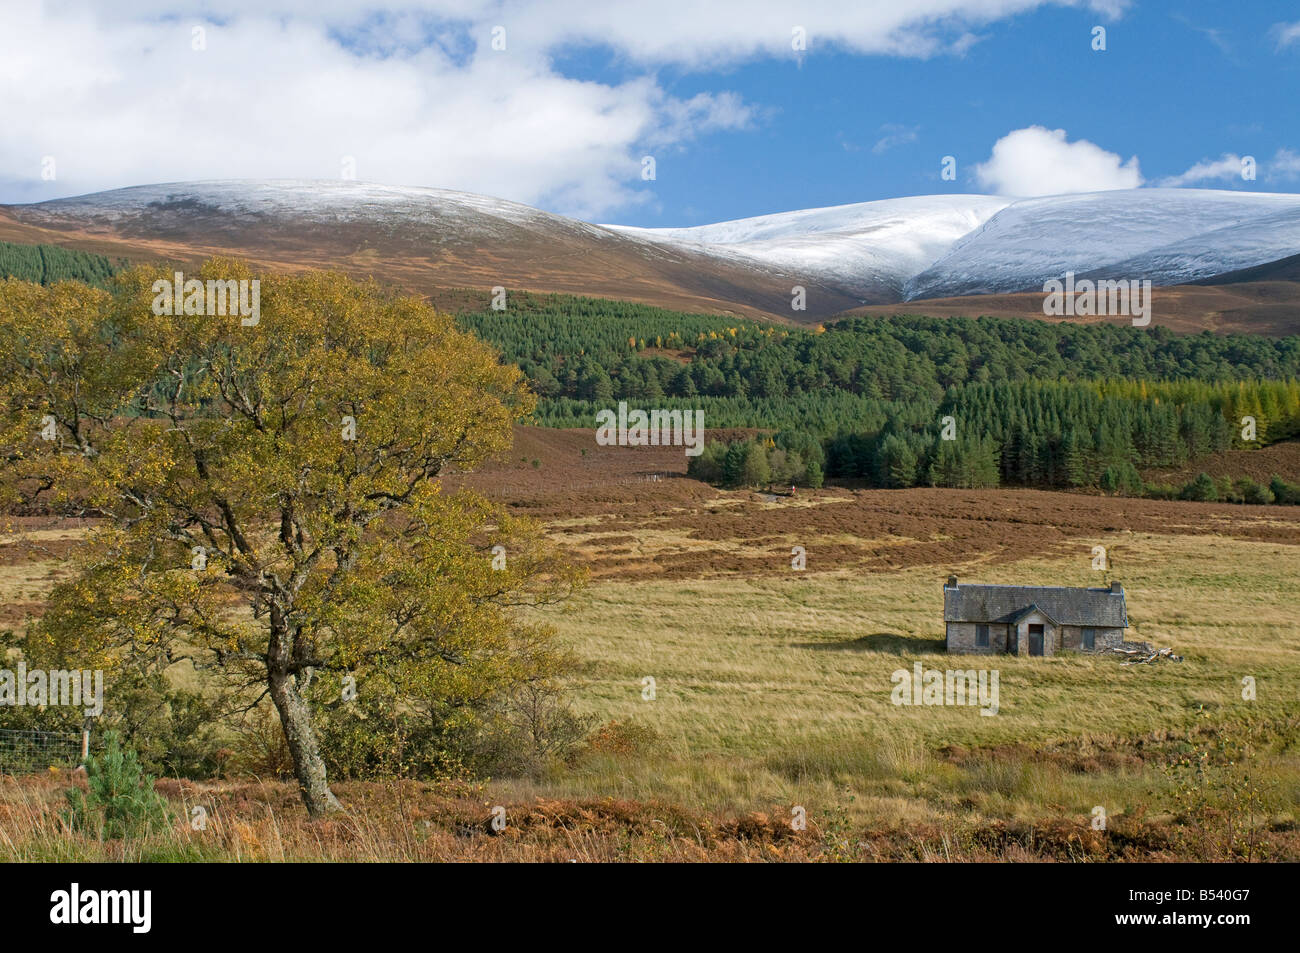 Achleum, Glen Feshie in the Cairngorms National Park Inverness-shire Scotland UK   SCO 1049 Stock Photo